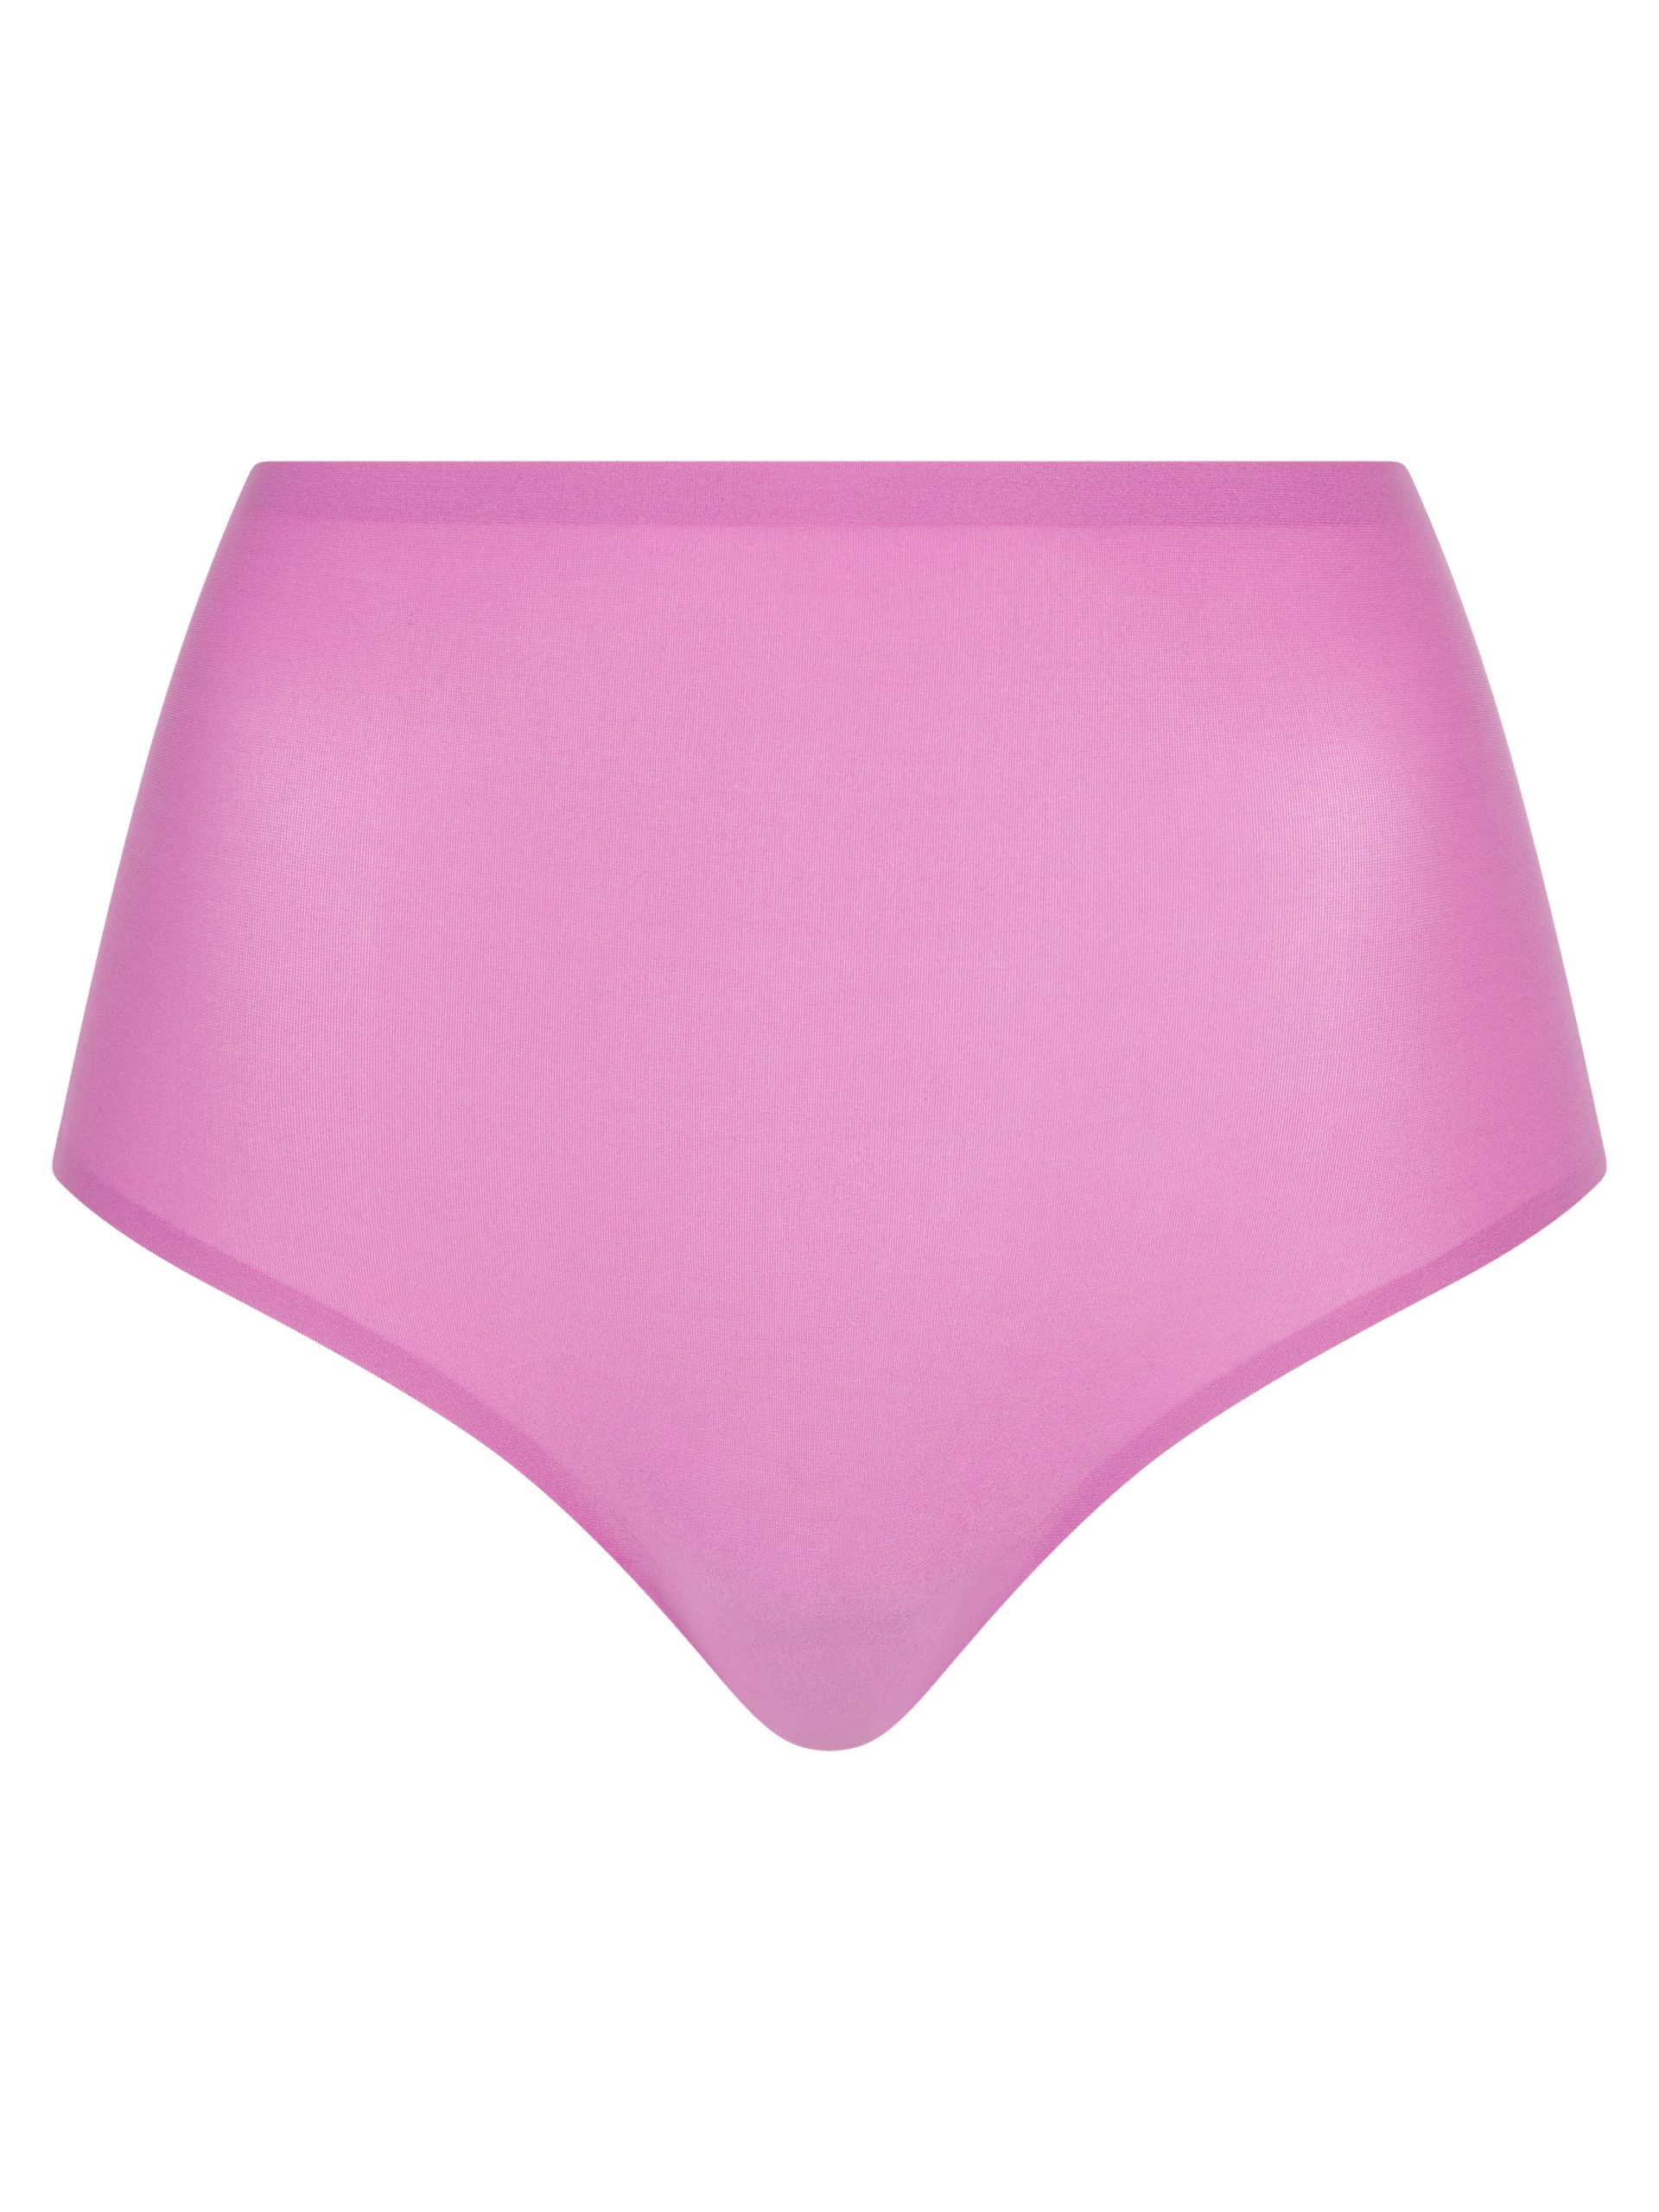 Chantelle Soft Stretch Full Brief Panty